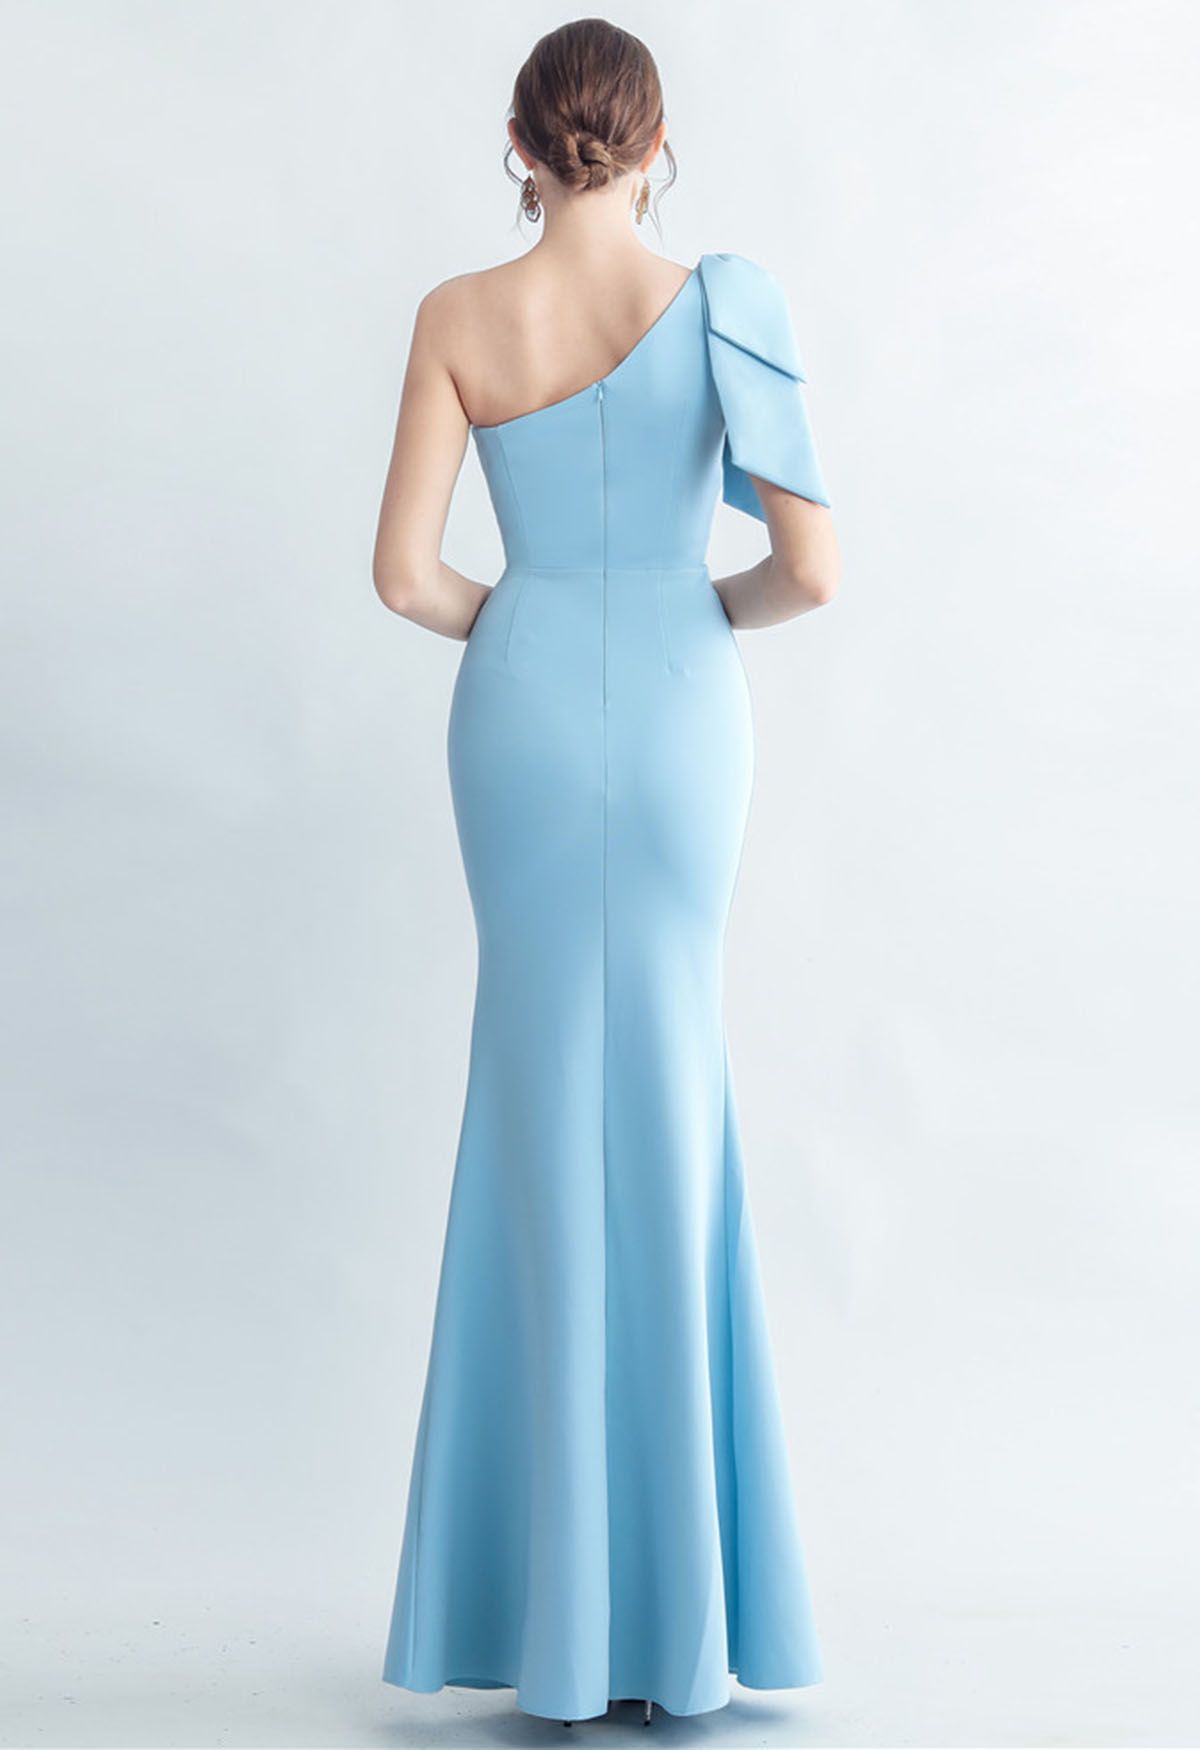 Bowknot One-Shoulder Embroidered Split Gown in Baby Blue